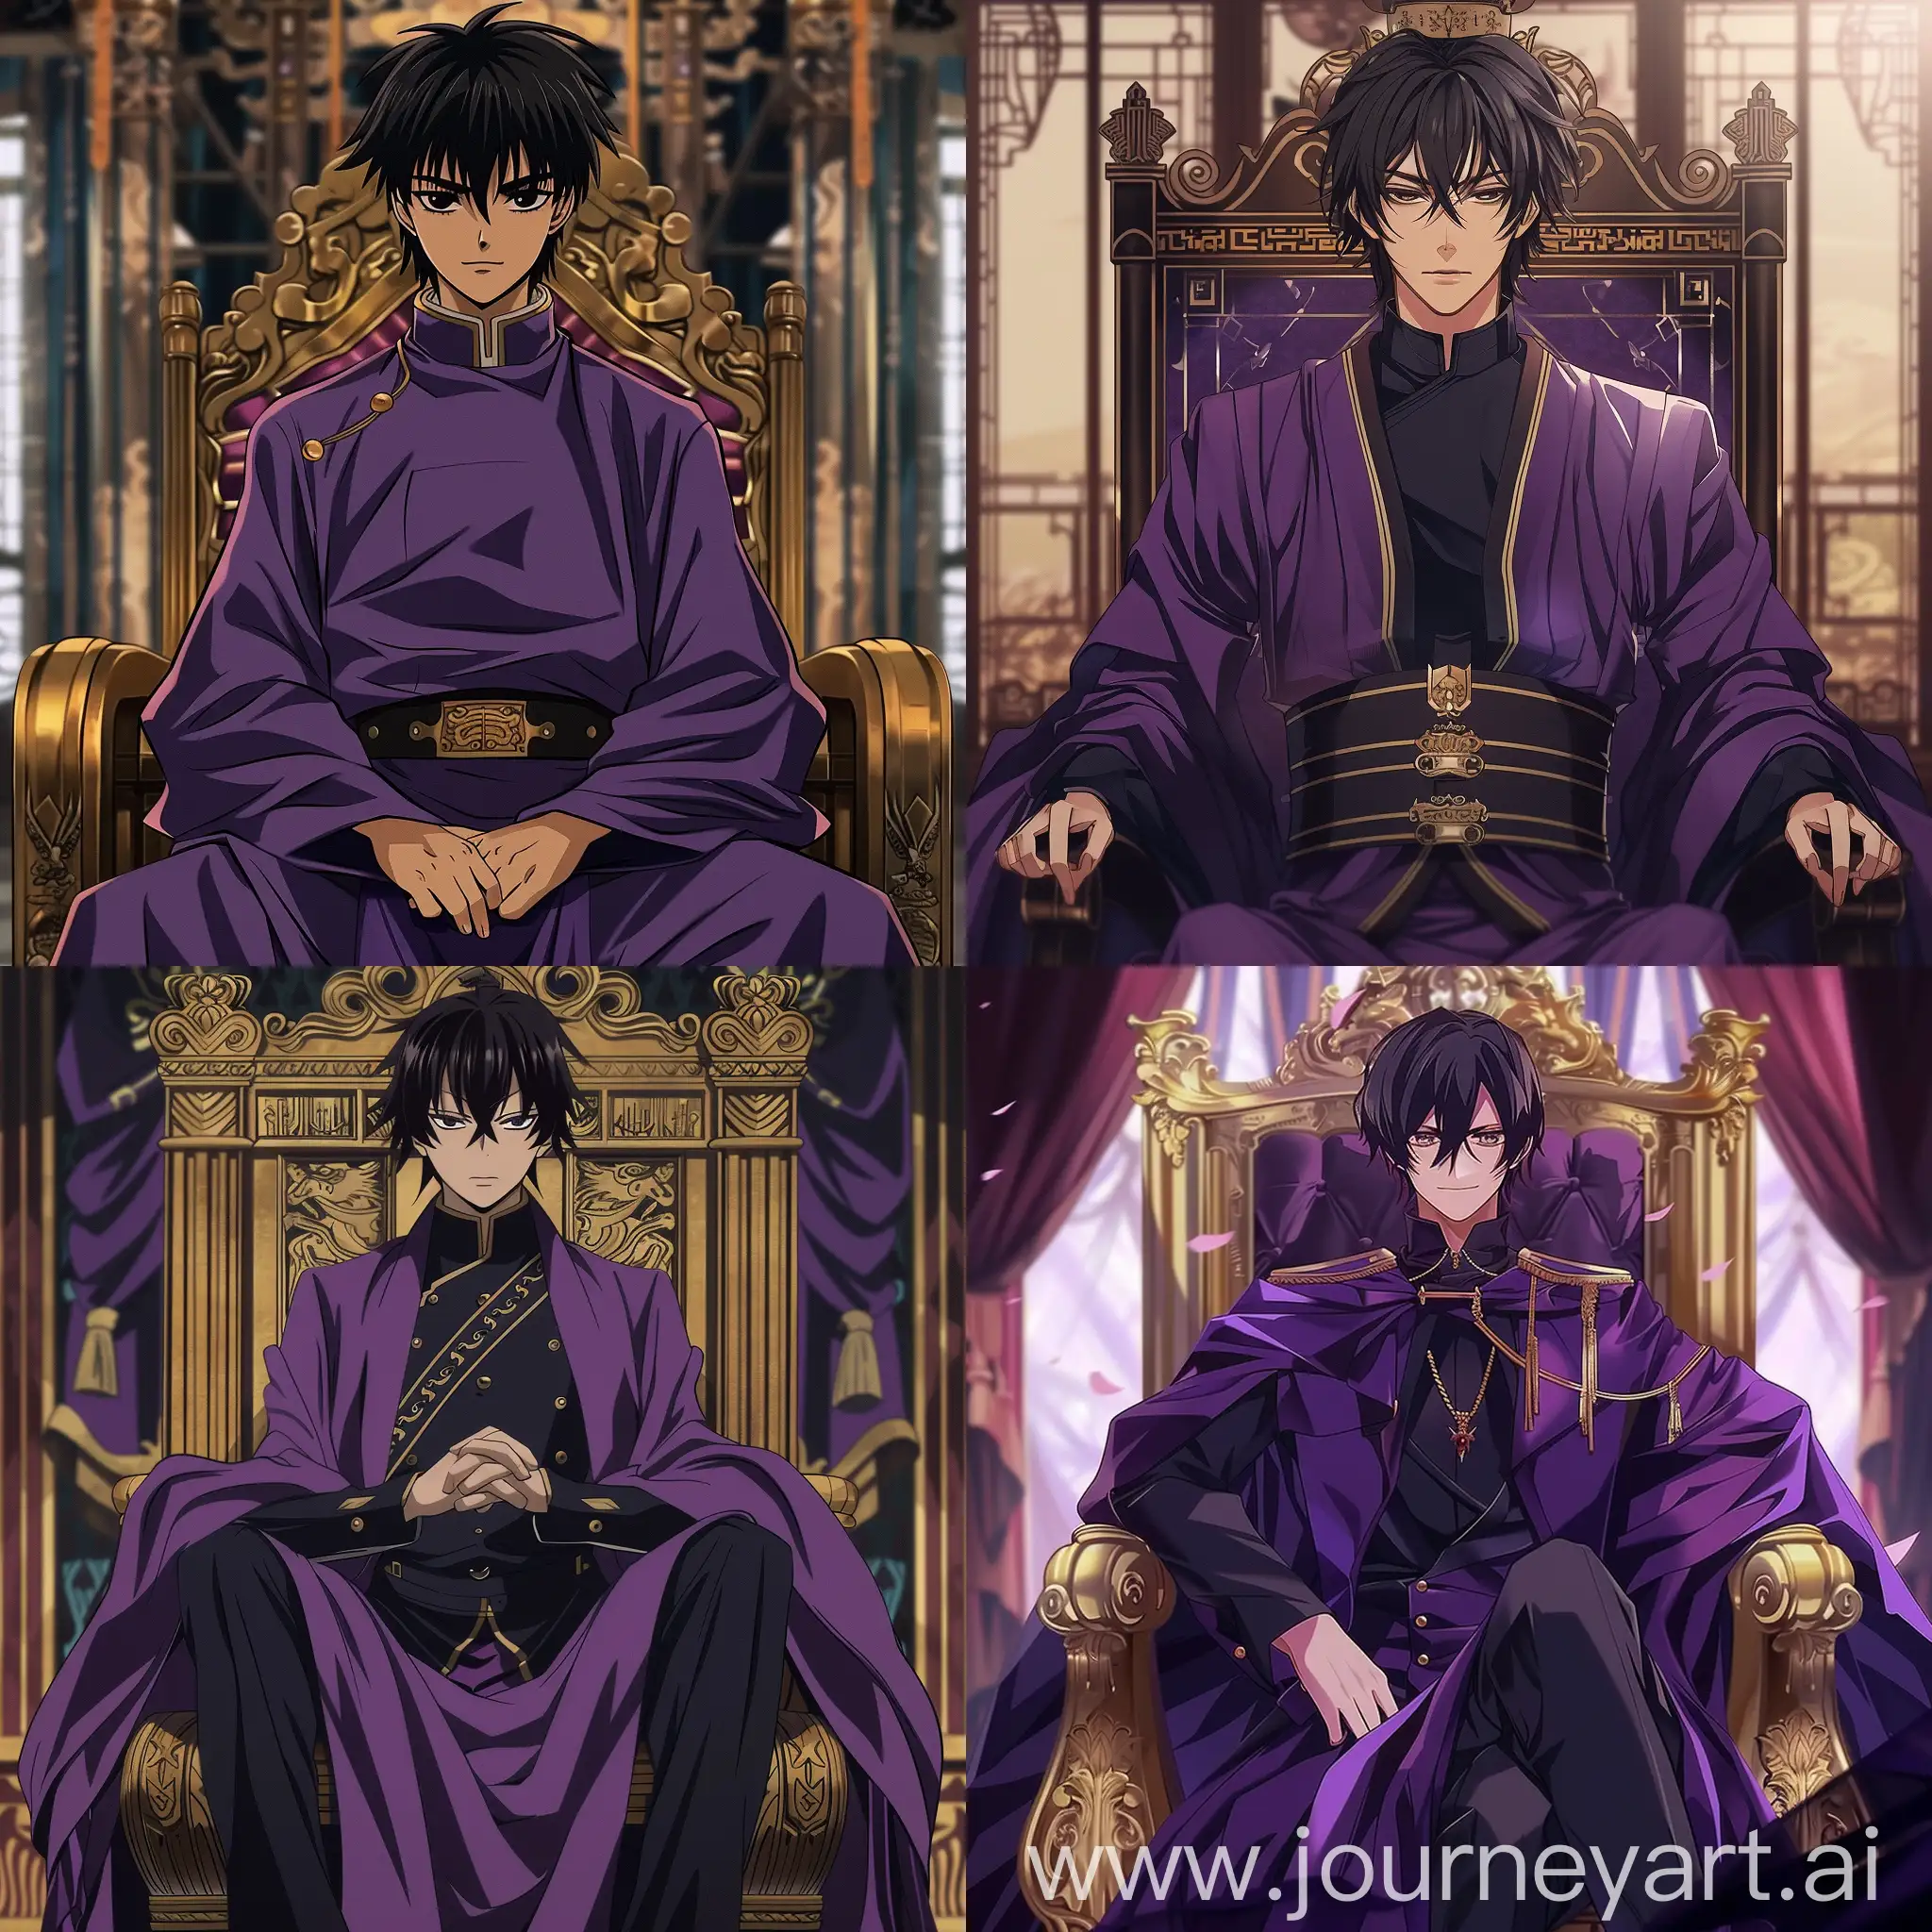 Regal-Anime-Portrait-of-a-27YearOld-Man-Seated-on-a-Purple-Emperor-Throne